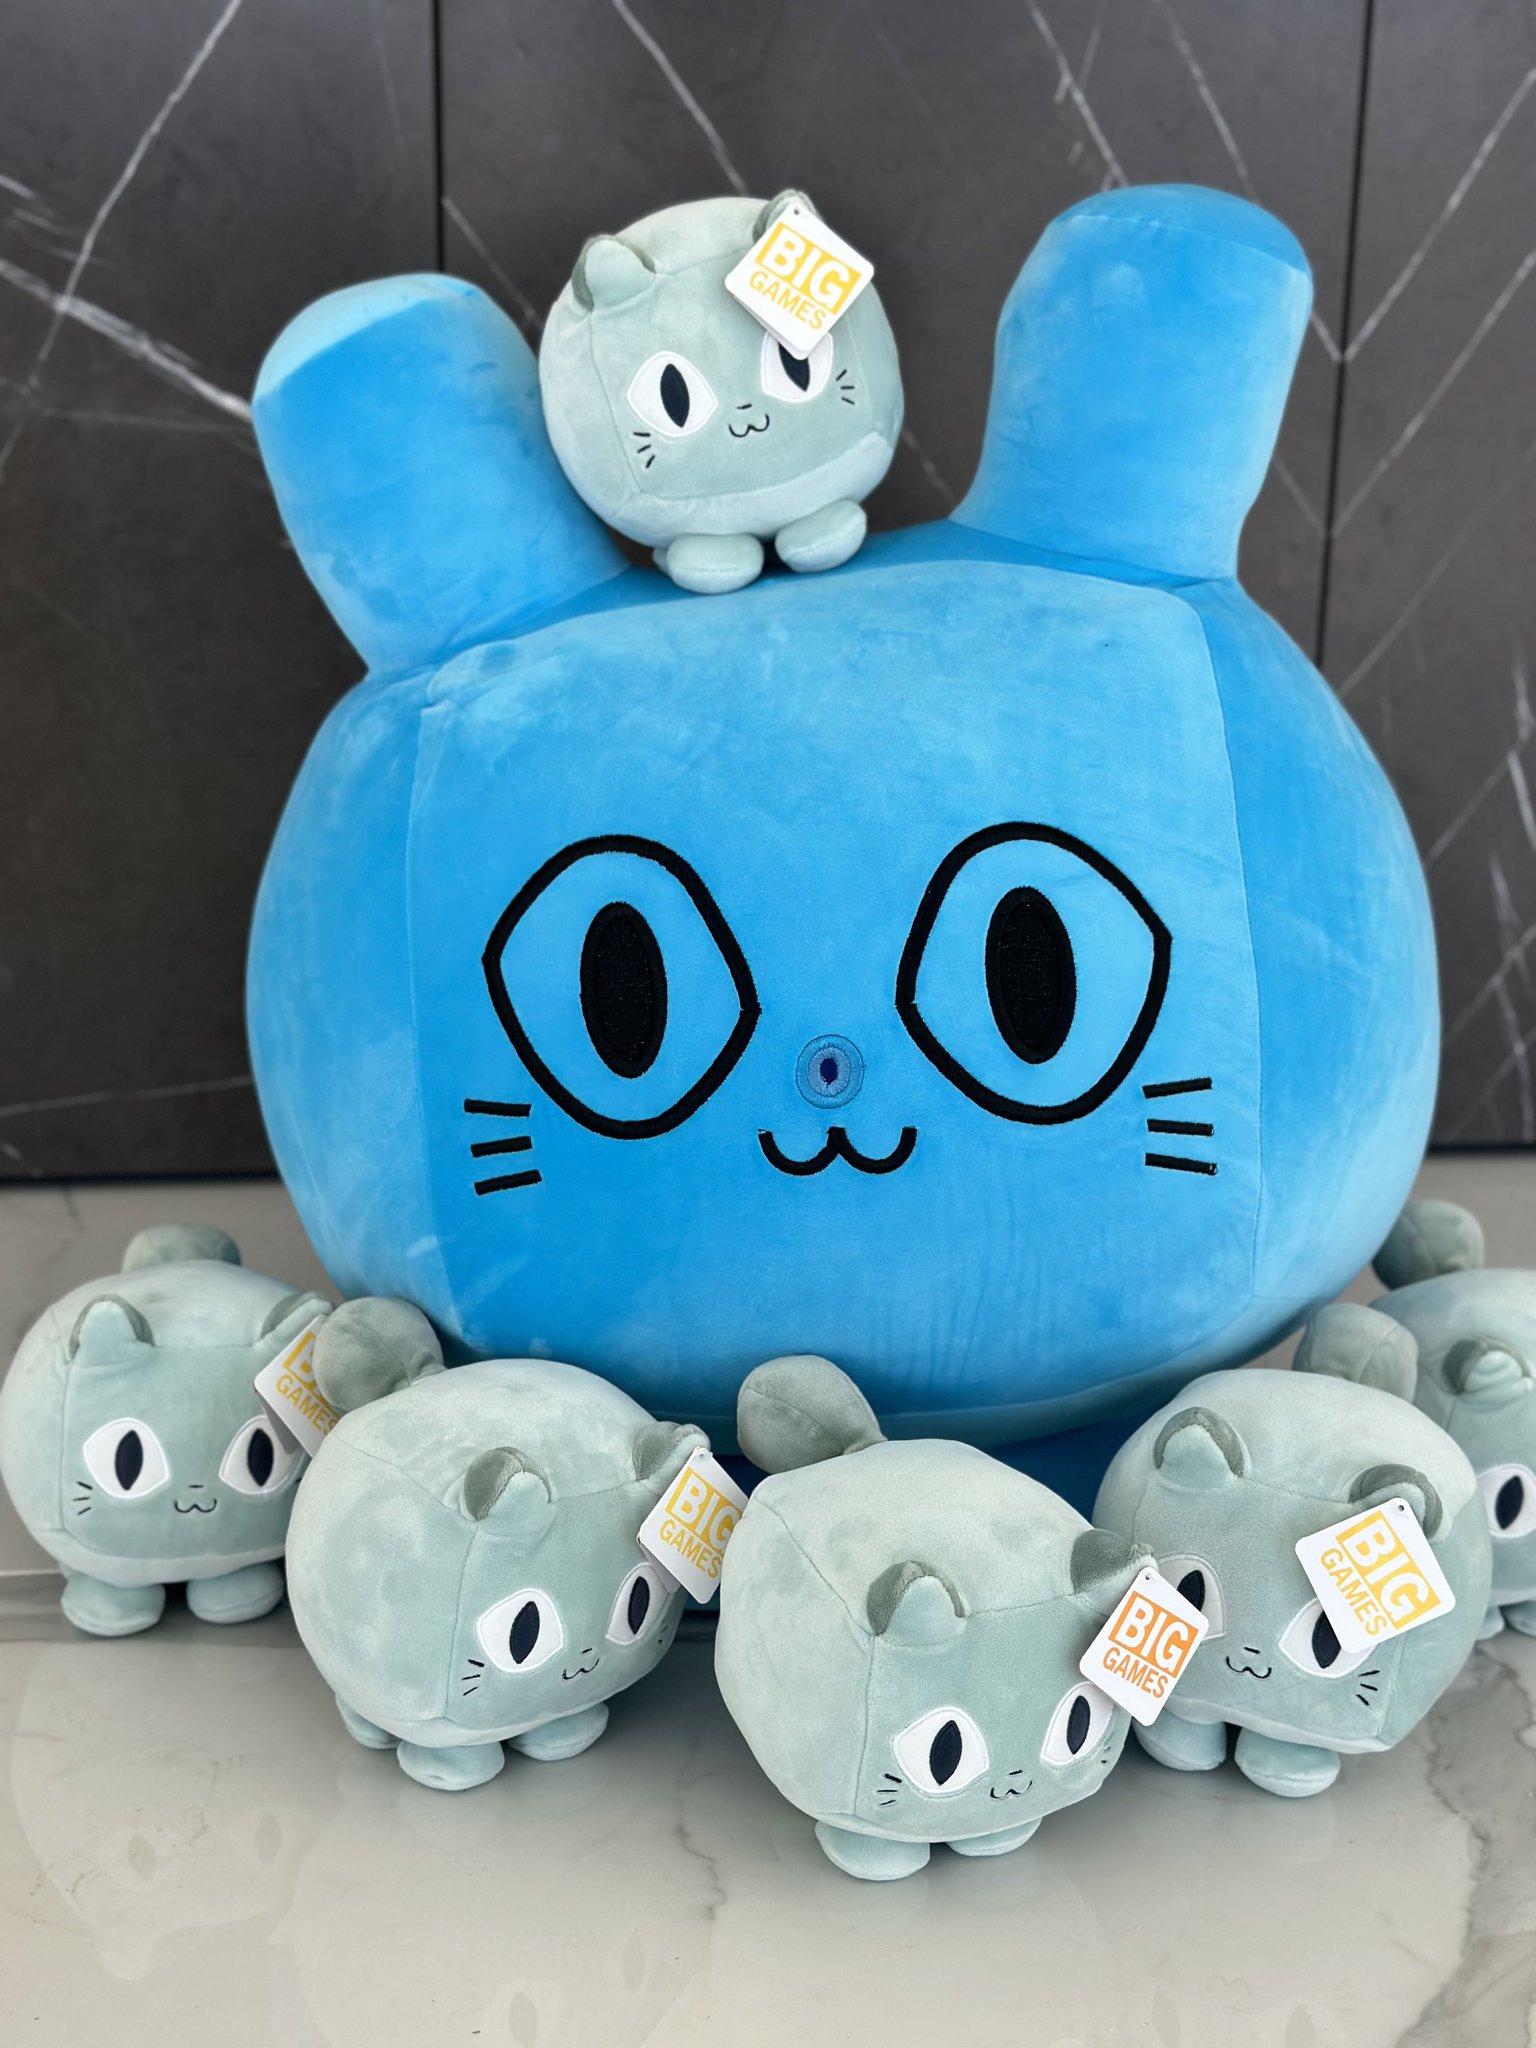 TITANIC Blue Balloon Cat Plush! [sold out] – BIG Games